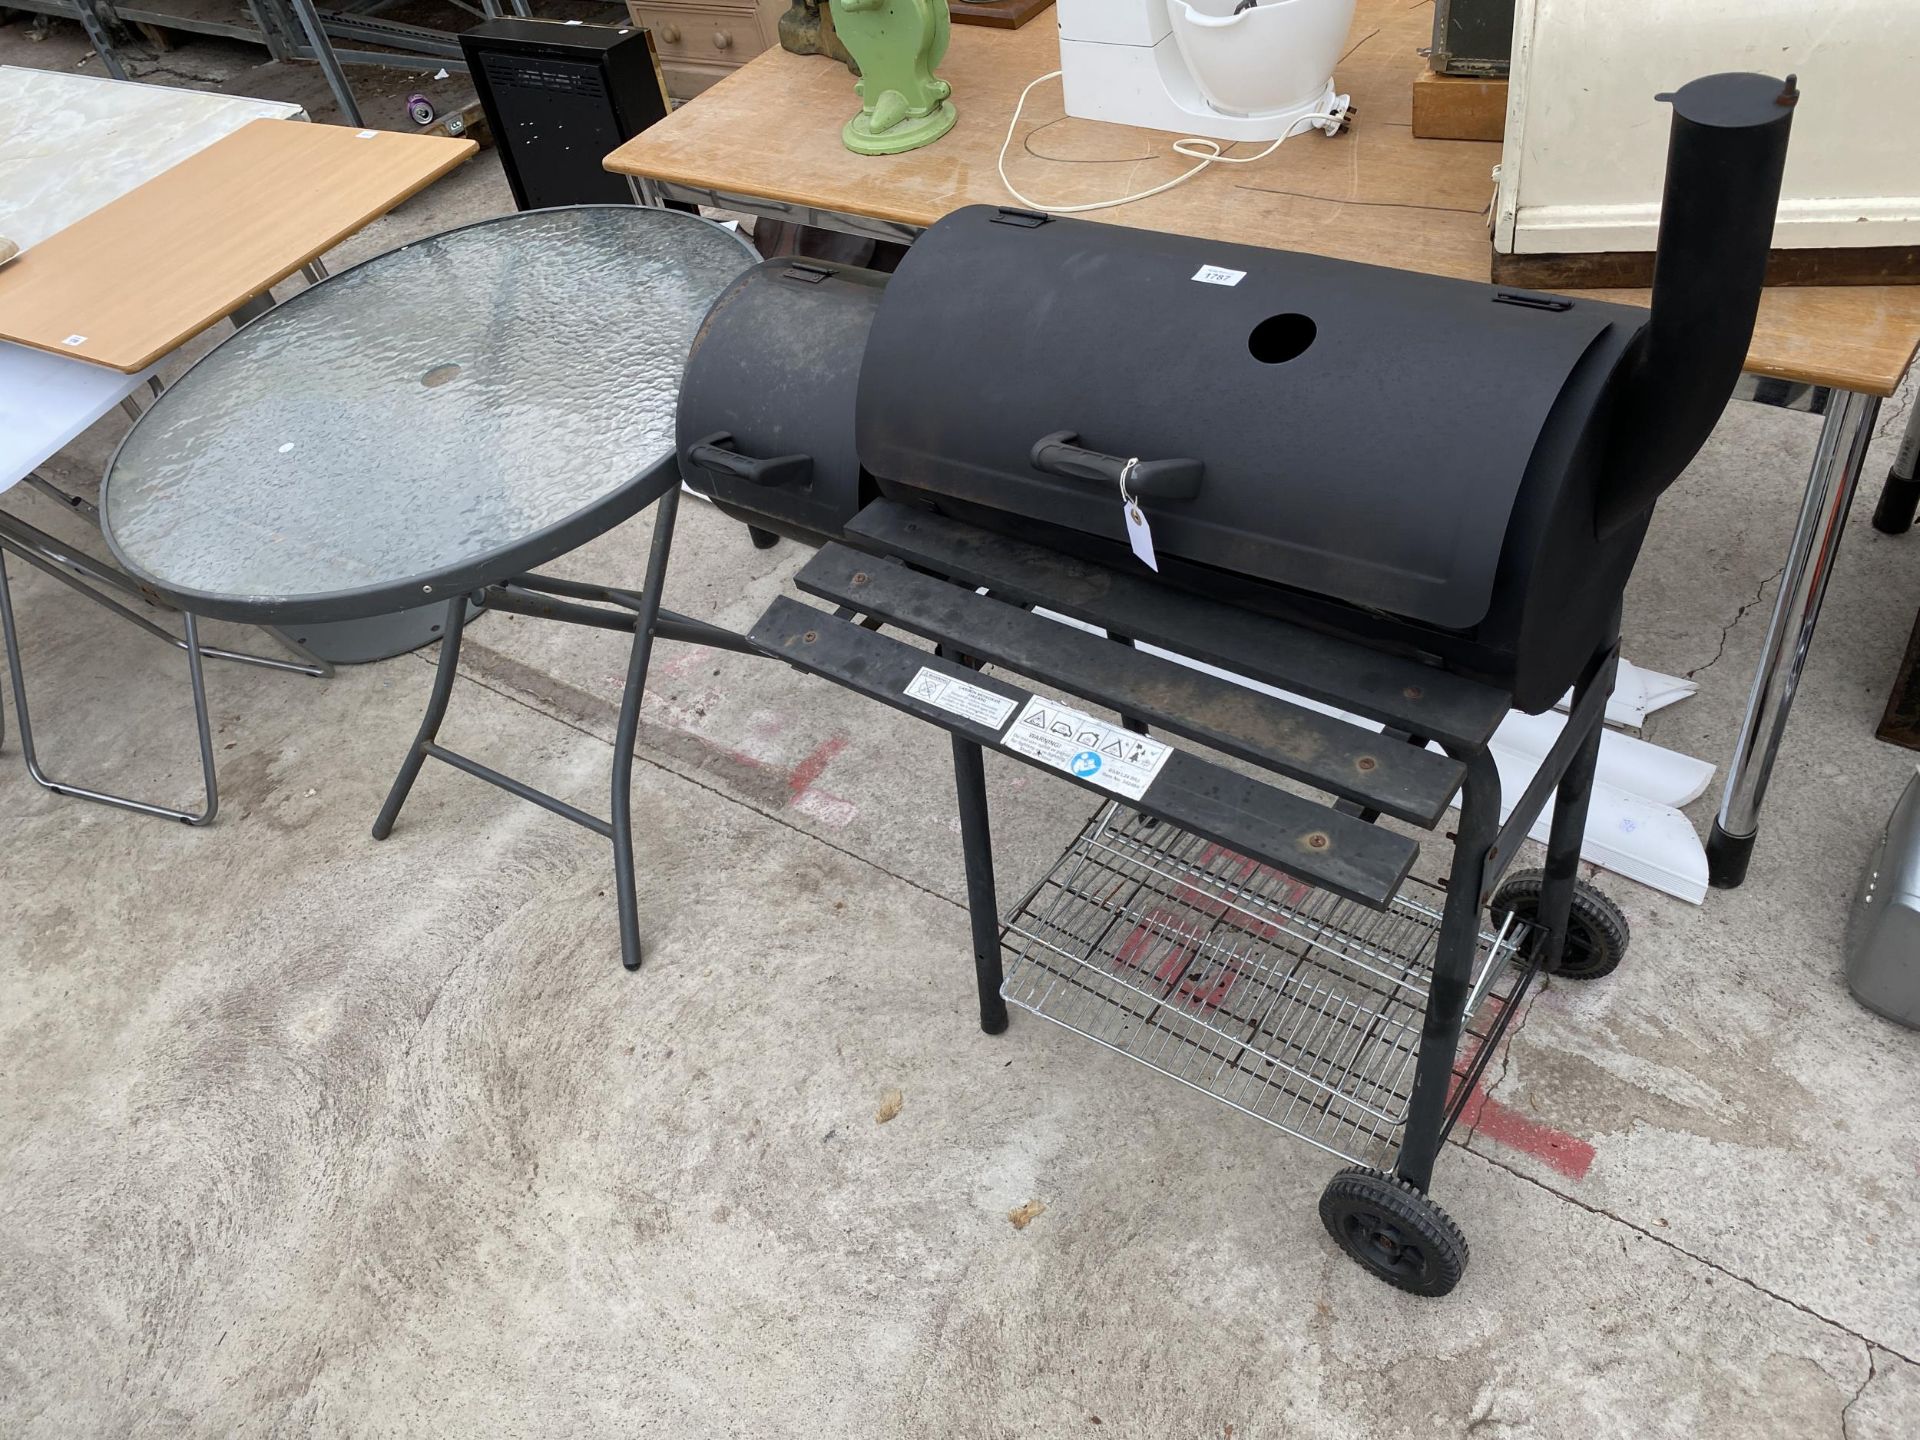 A CHARCOAL BBQ AND A GLASS TOPPED PATIO TABLE